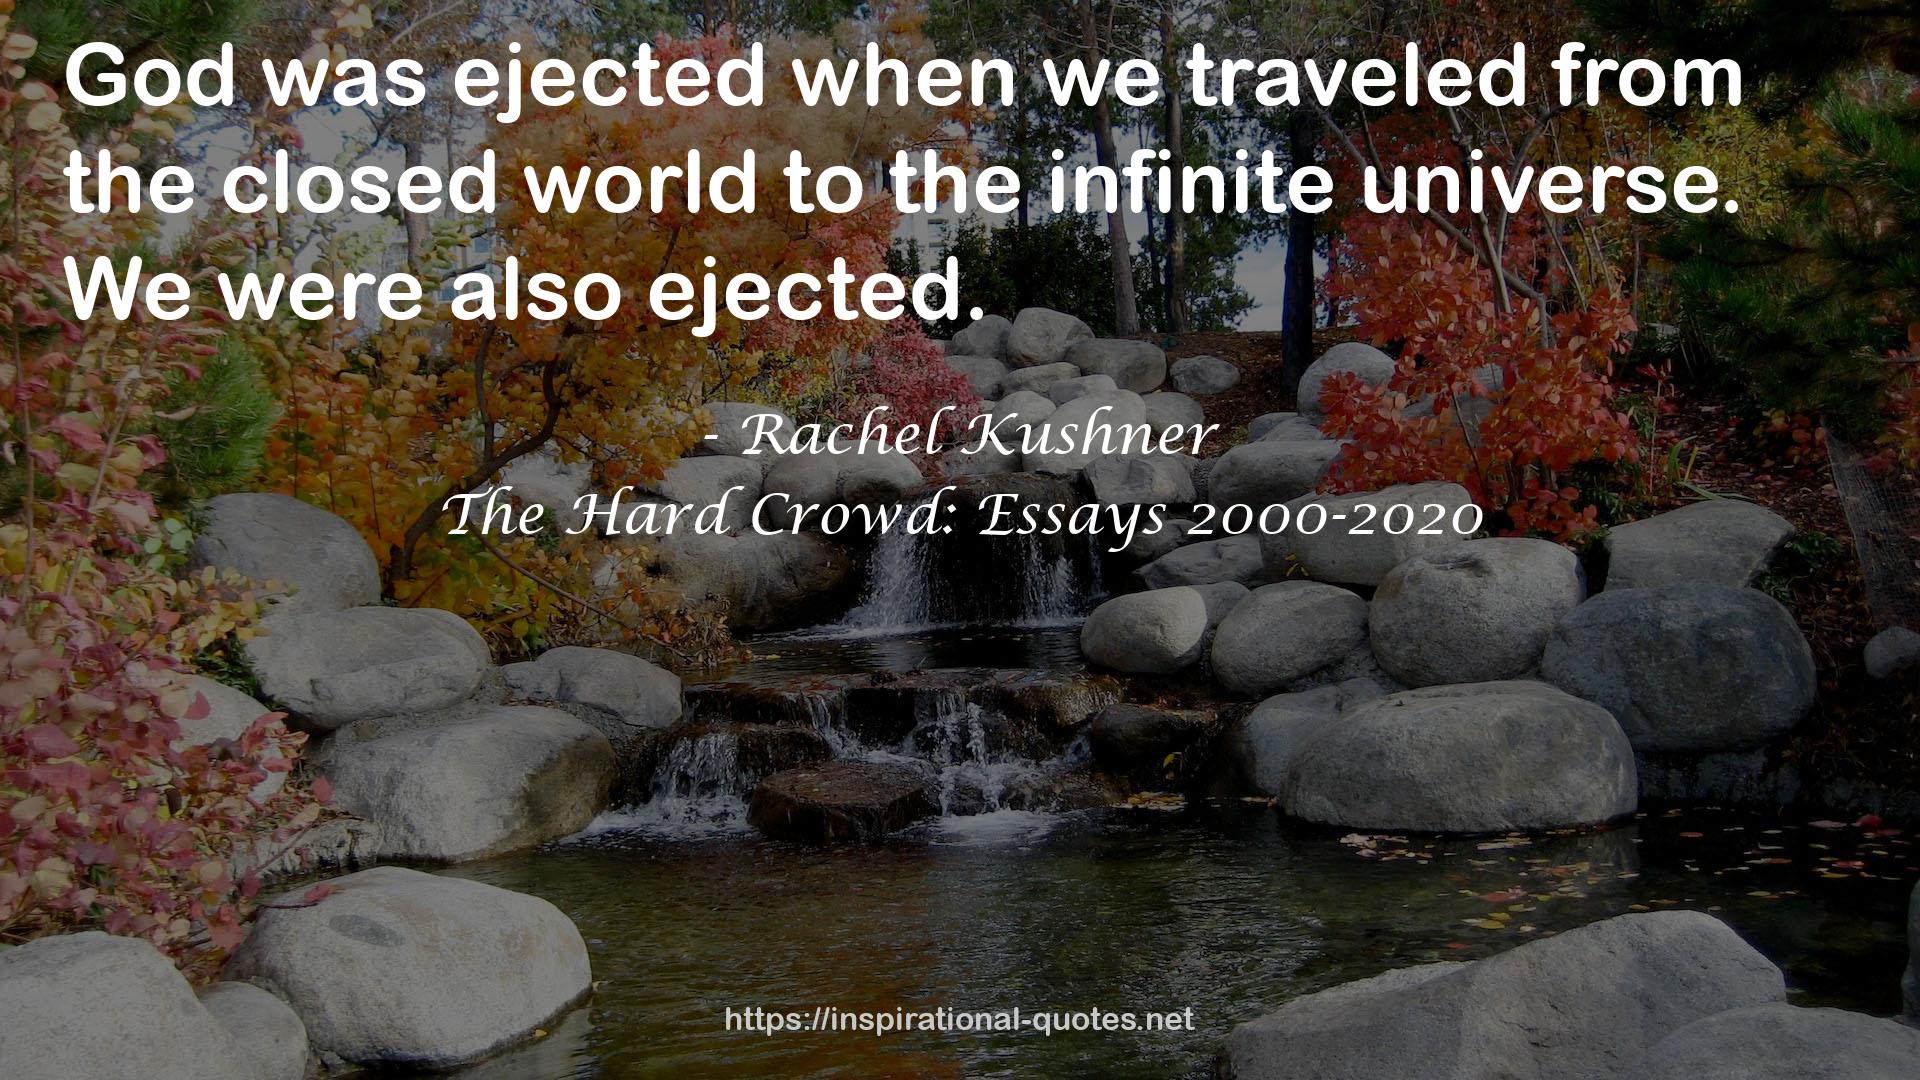 The Hard Crowd: Essays 2000-2020 QUOTES